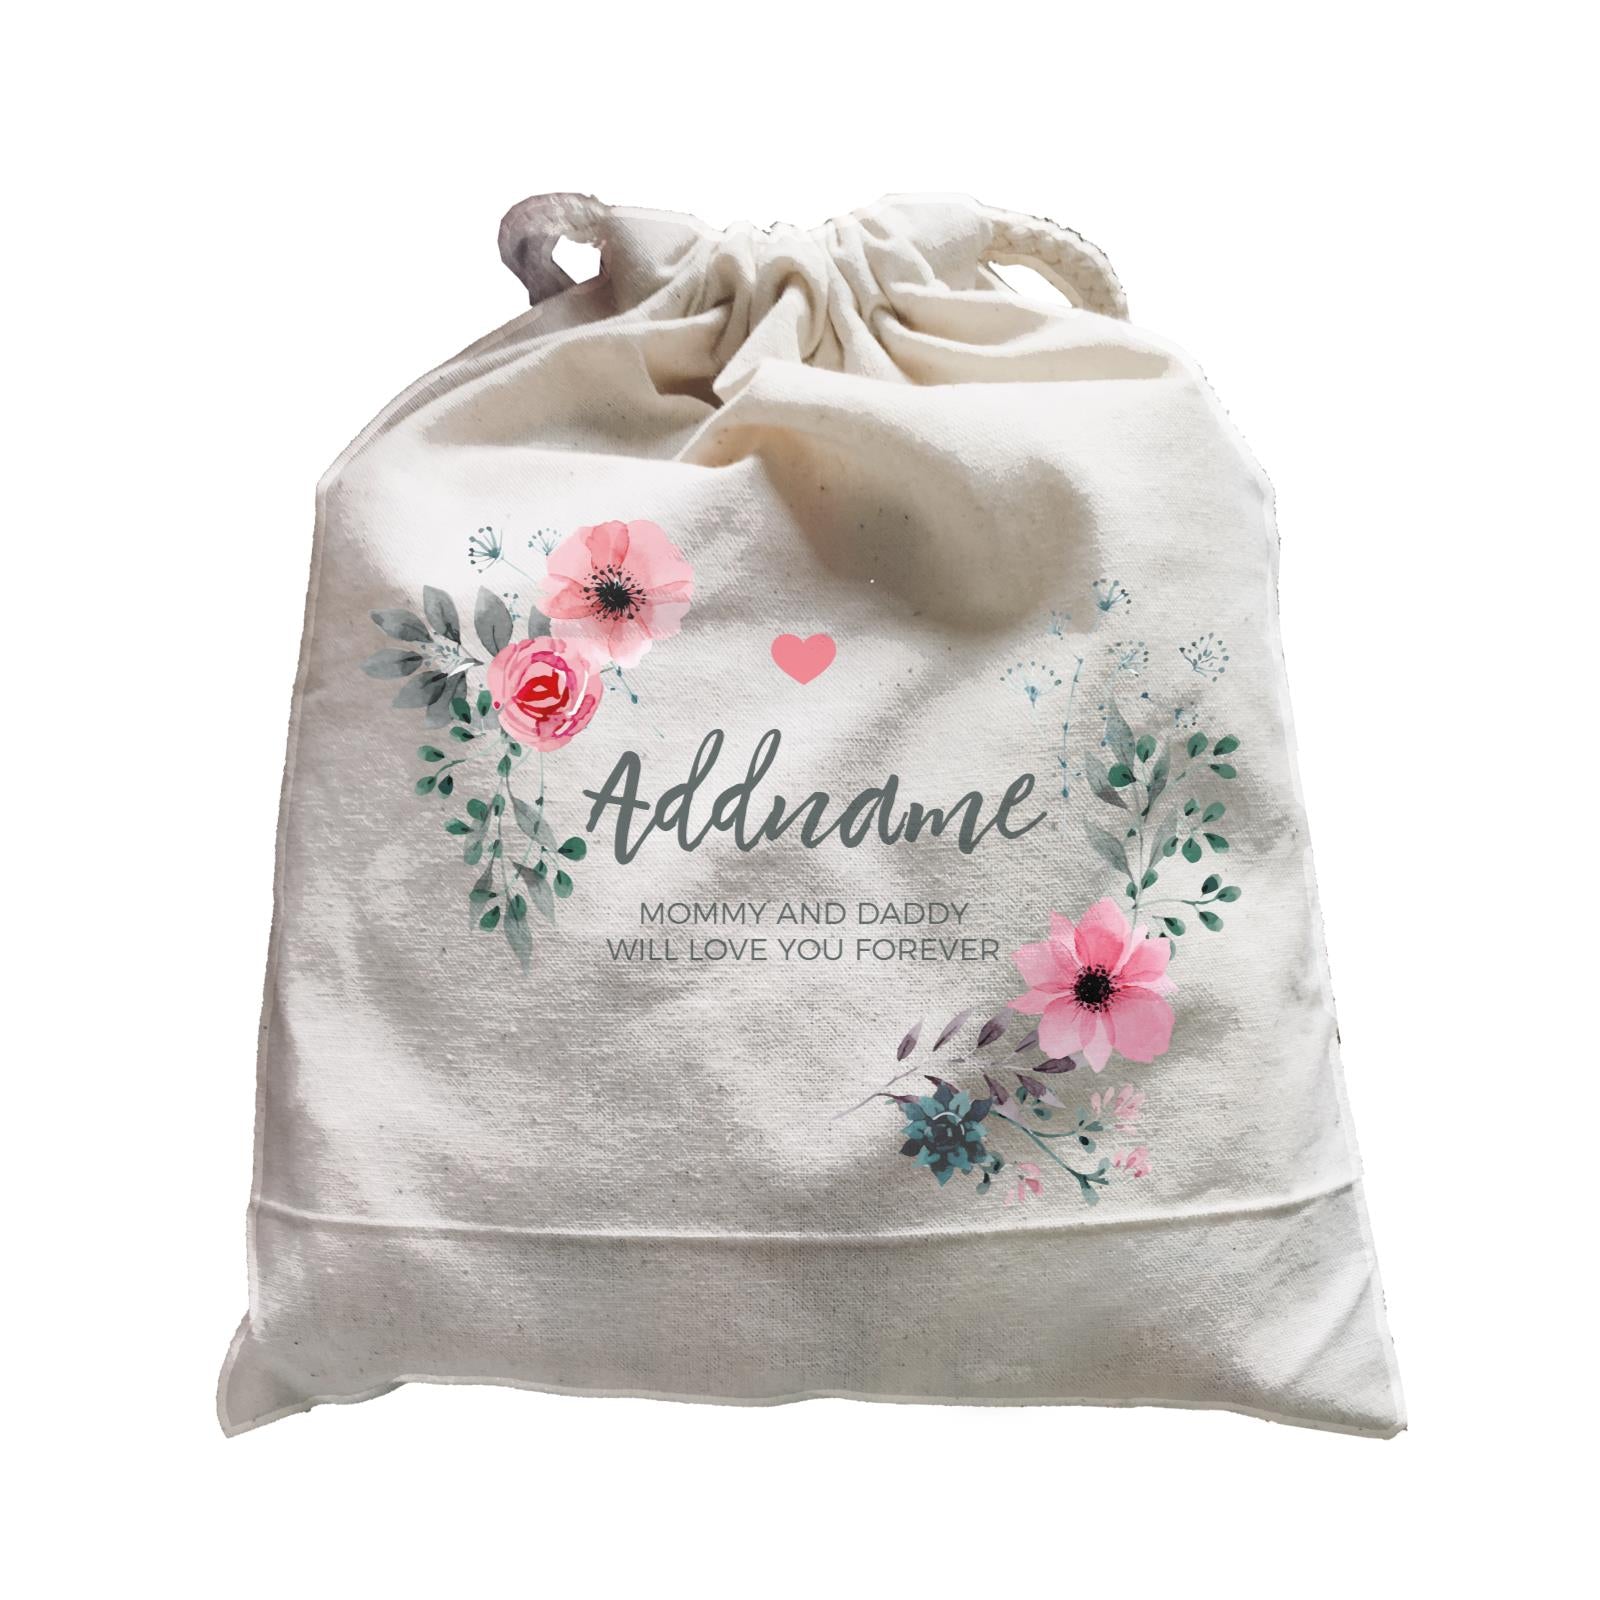 Watercolour Pink Flowers and Dark Wreath Personalizable with Name and Text Satchel